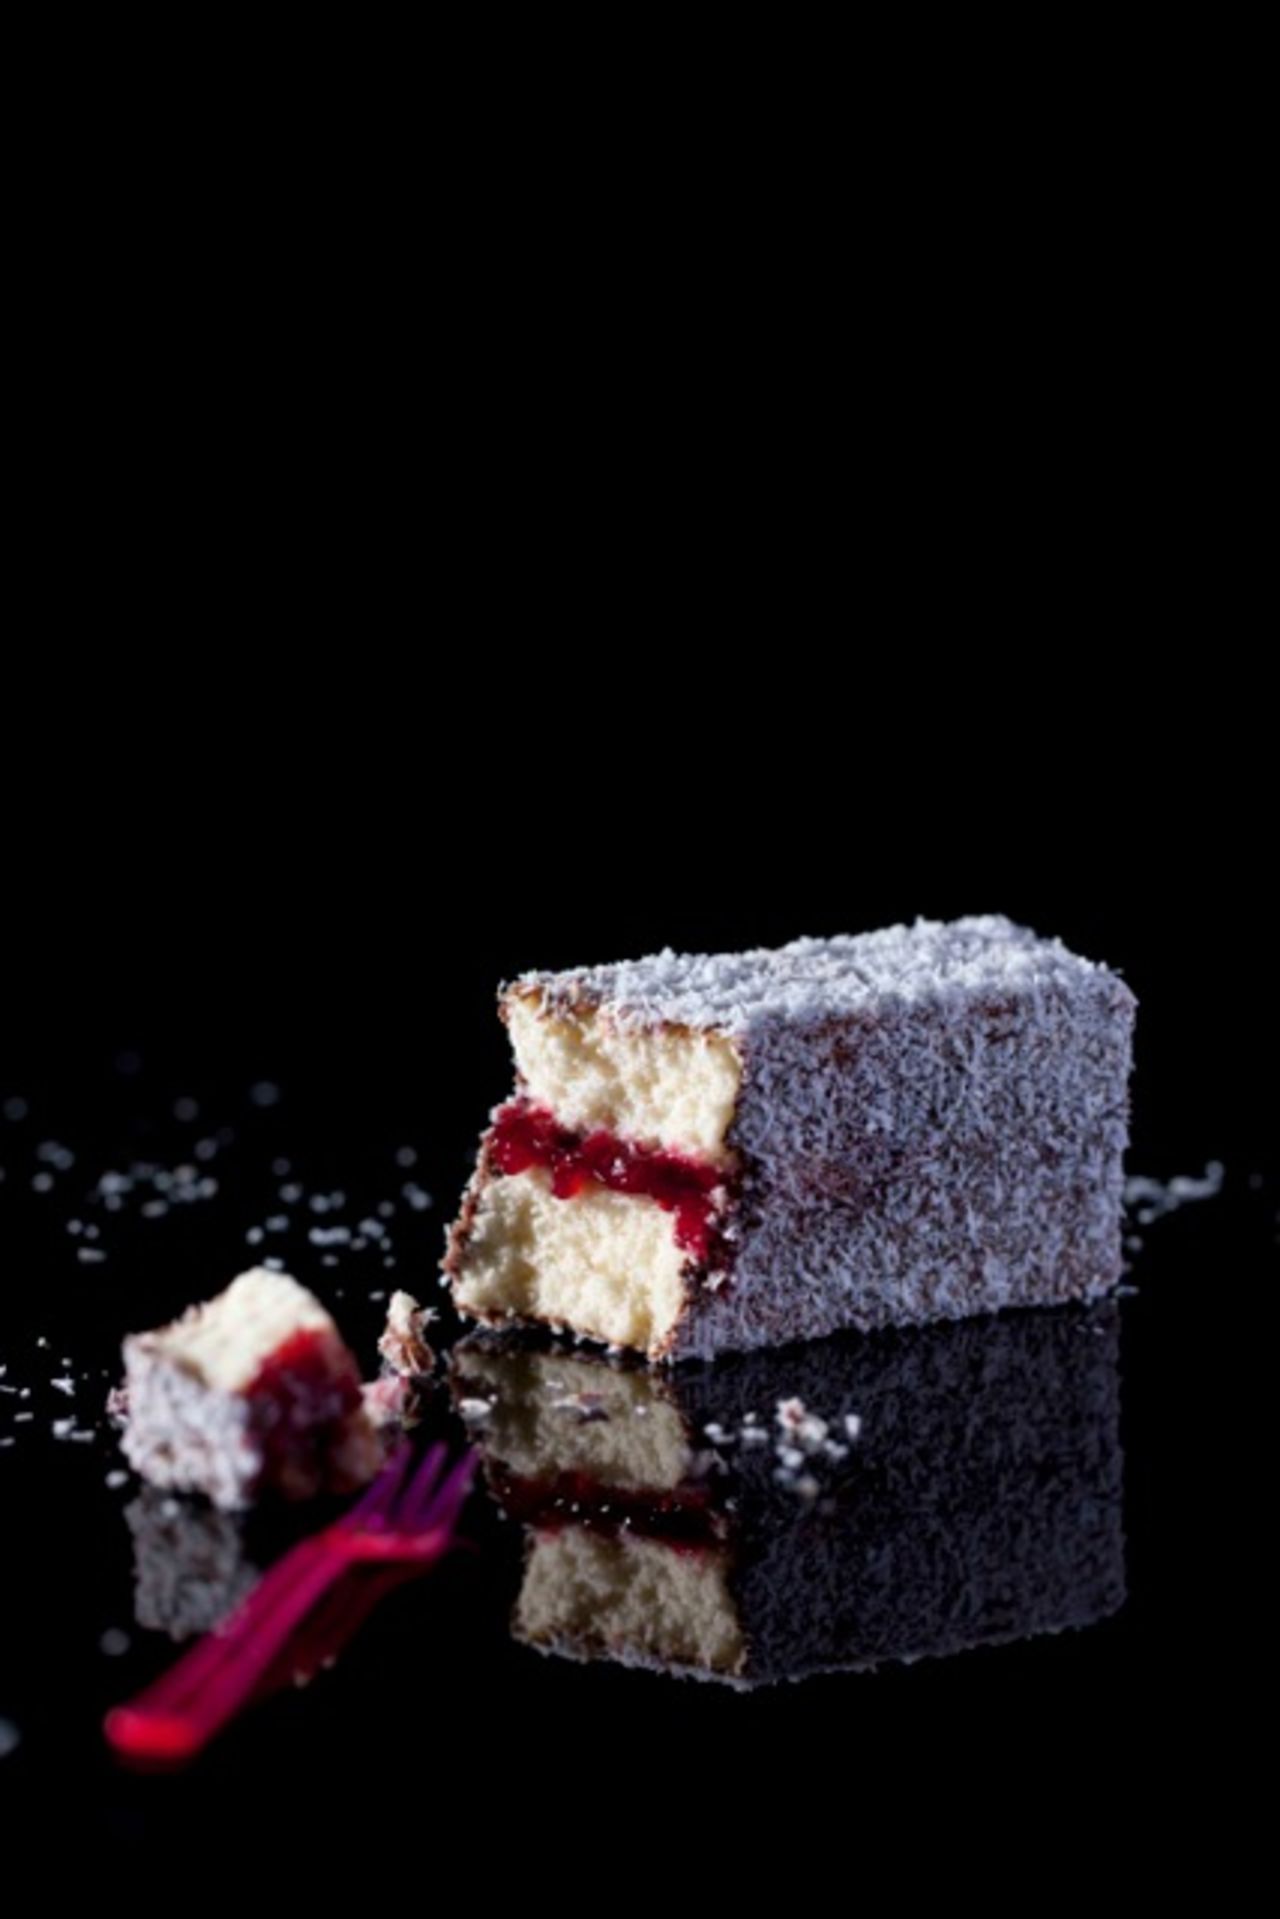 The classic Aussie Lamington is named after a former governor of Queensland. It consists of plain sponge cake jazzed up with a chocolate coating and coconut sprinkles. 